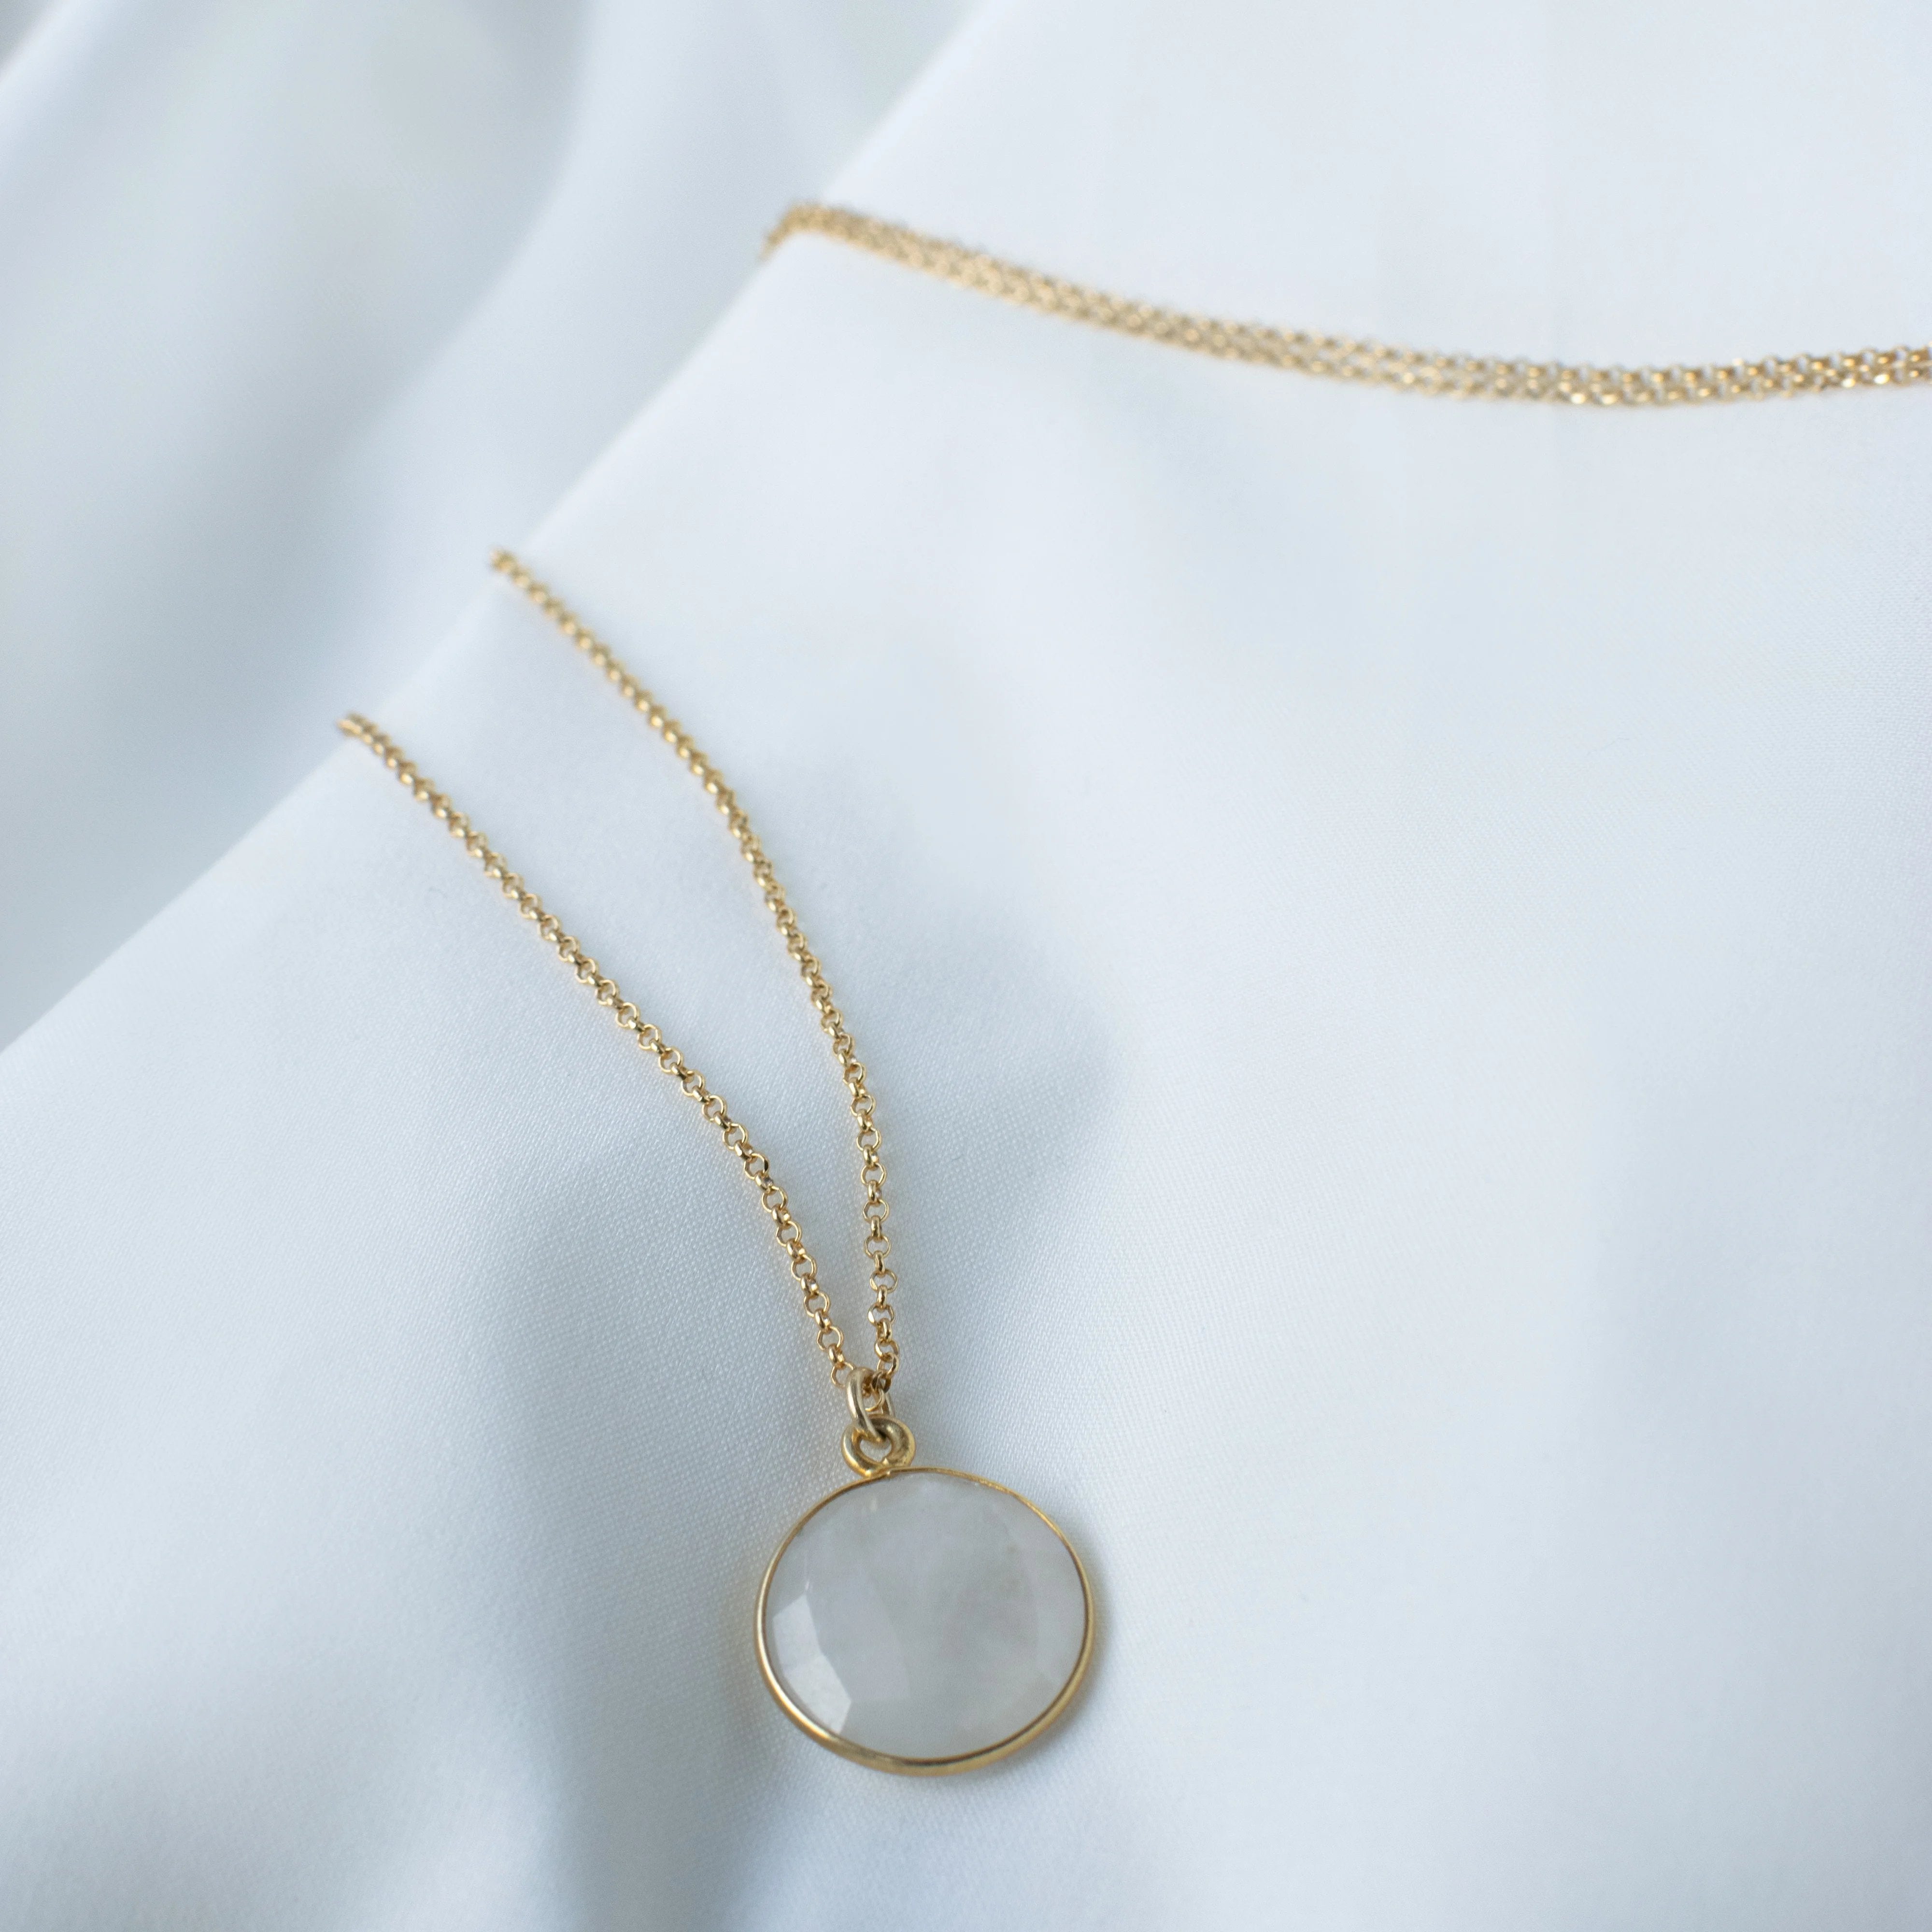 Moonstone Necklace Summer Love Story from One Dame Lane